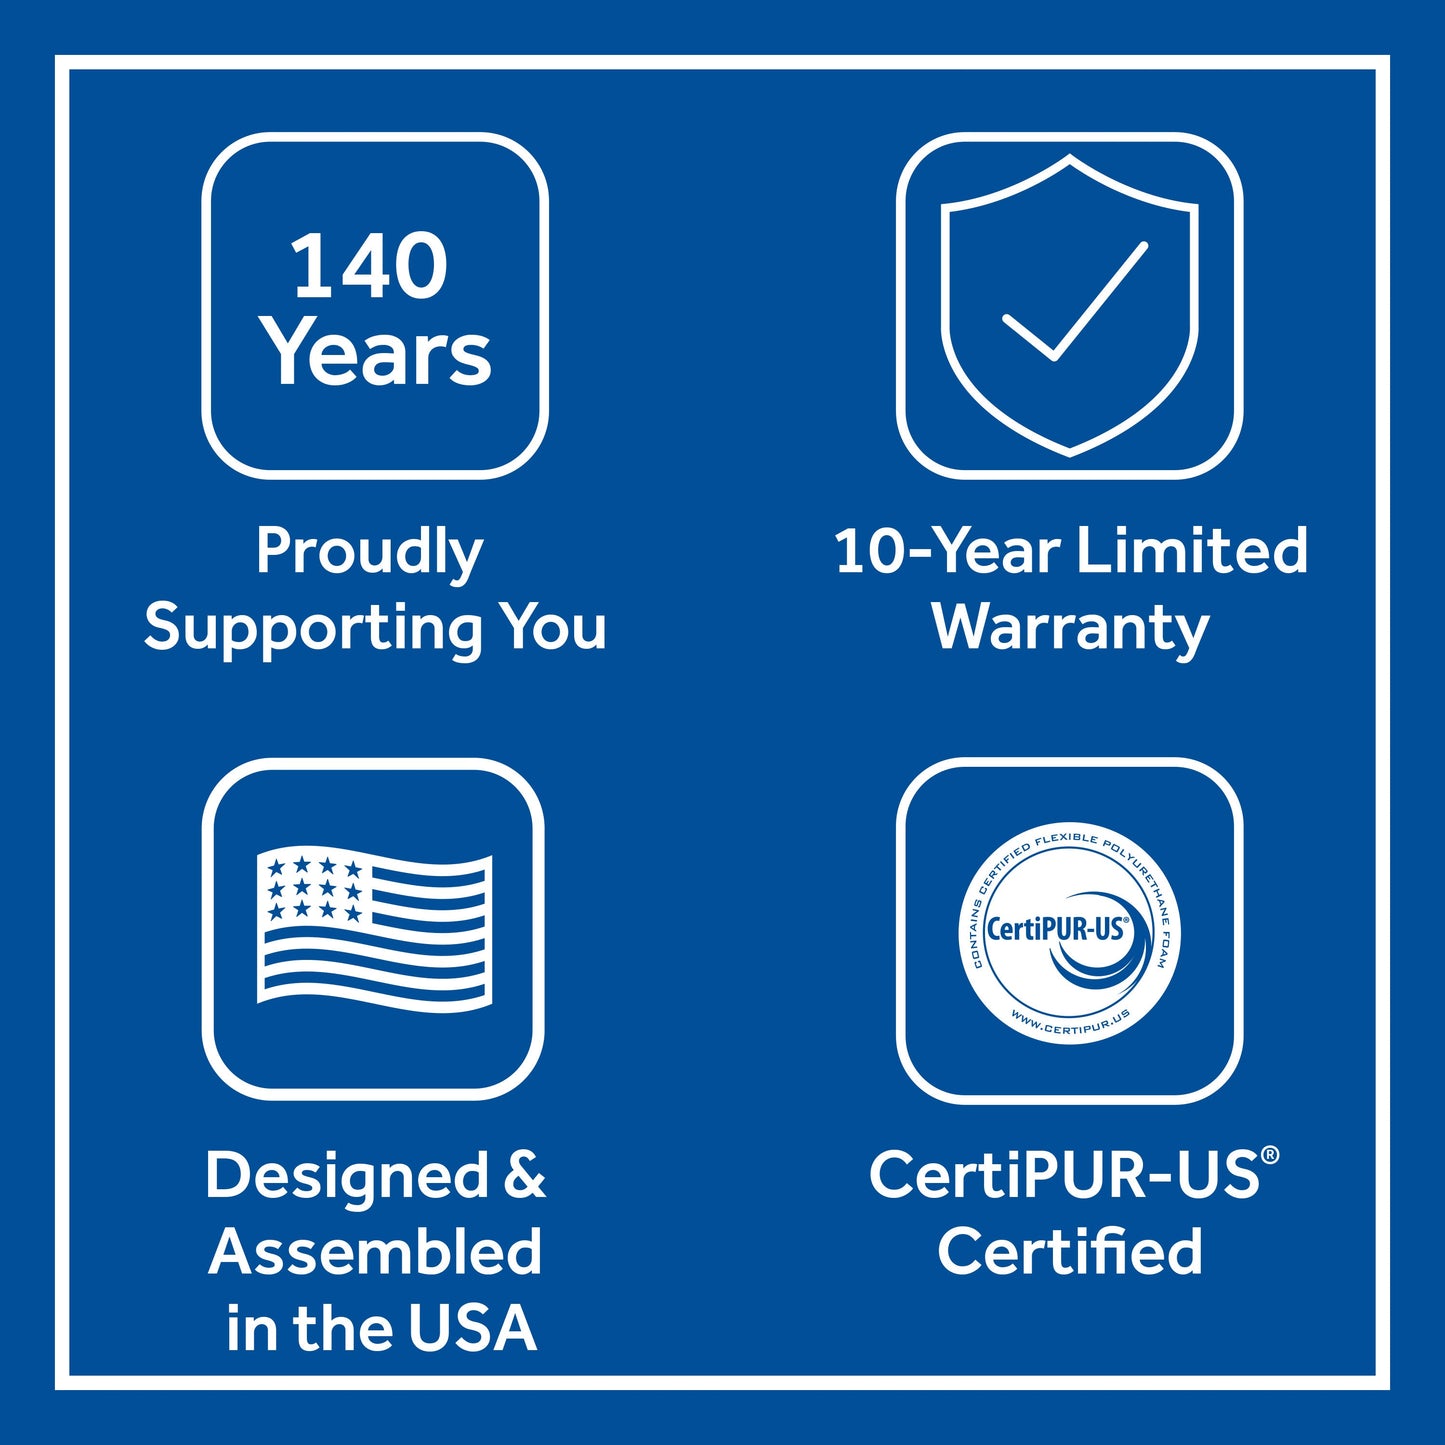 Sealy High Point Firm Mattress Features; Proudly supporting you, 10 year limited warranty, designed and assembled in the USA, CertiPUR-US Certified